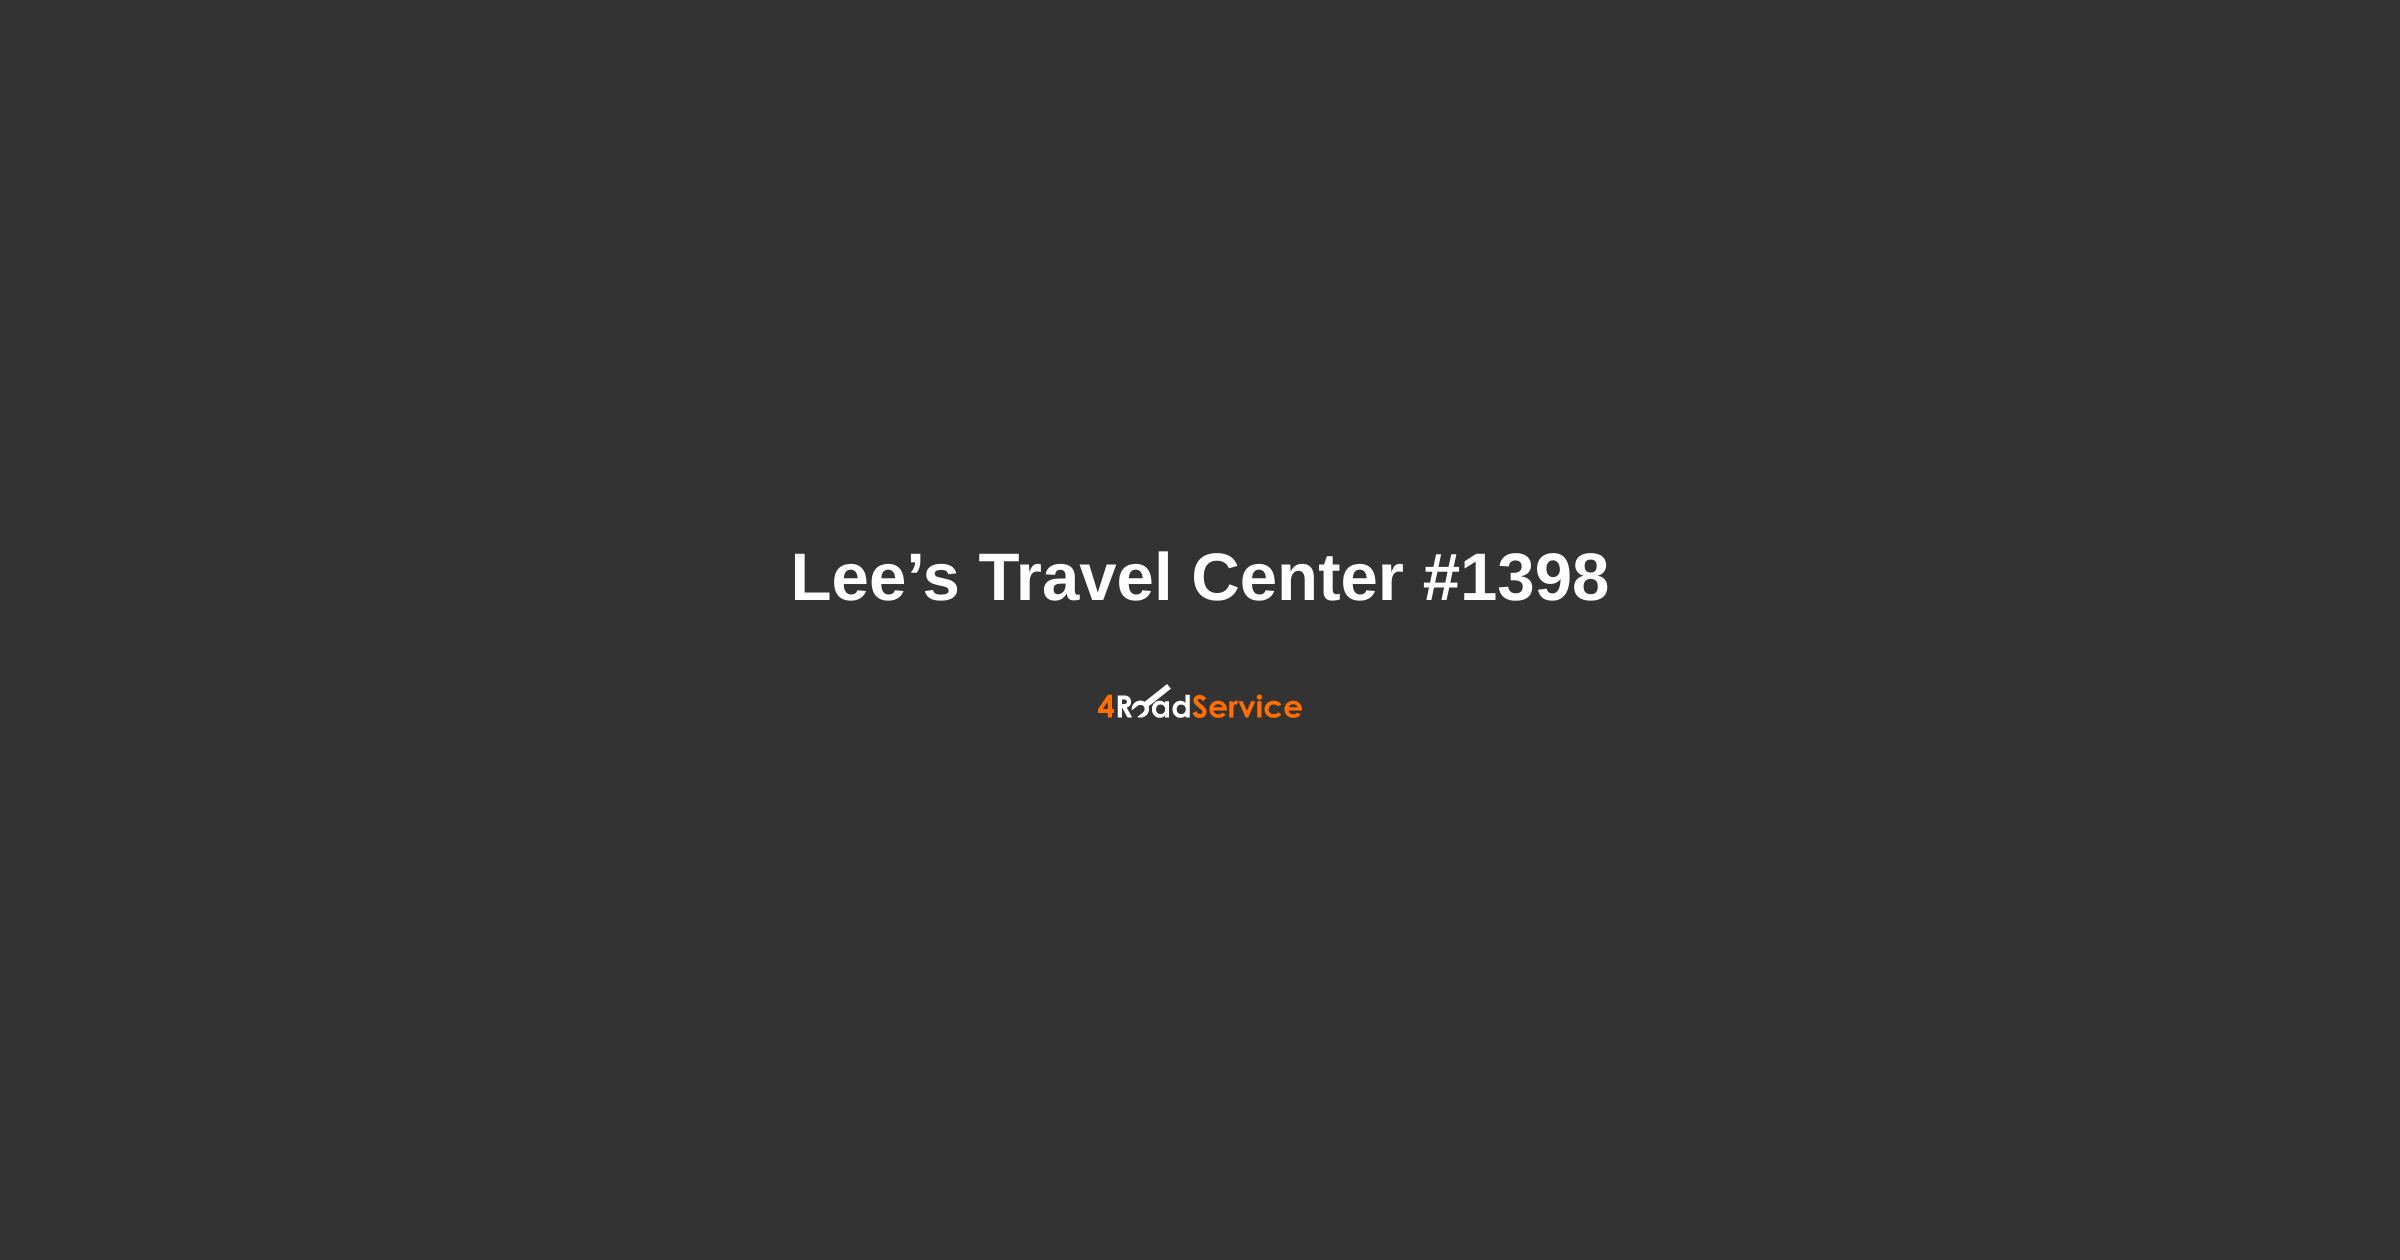 Lee's Travel Center #1398 in Knoxville, TN ・ 4 Road Service